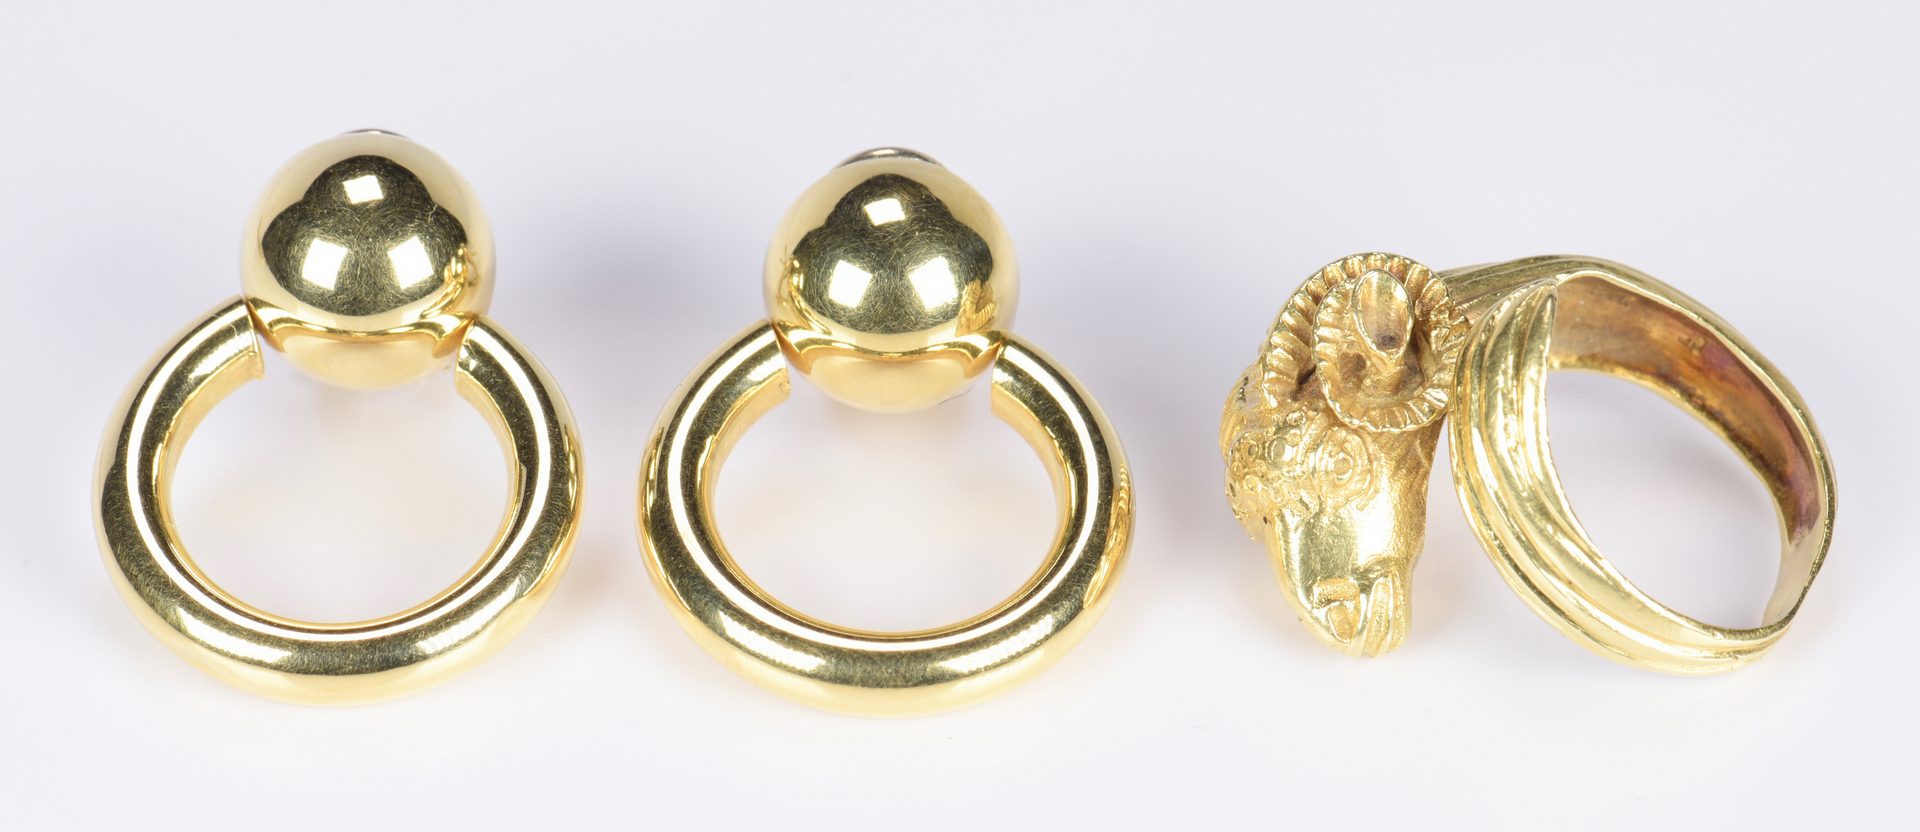 Lot 792: 4 Items of 18K Gold Jewelry, Incl Ram’s Head Ring